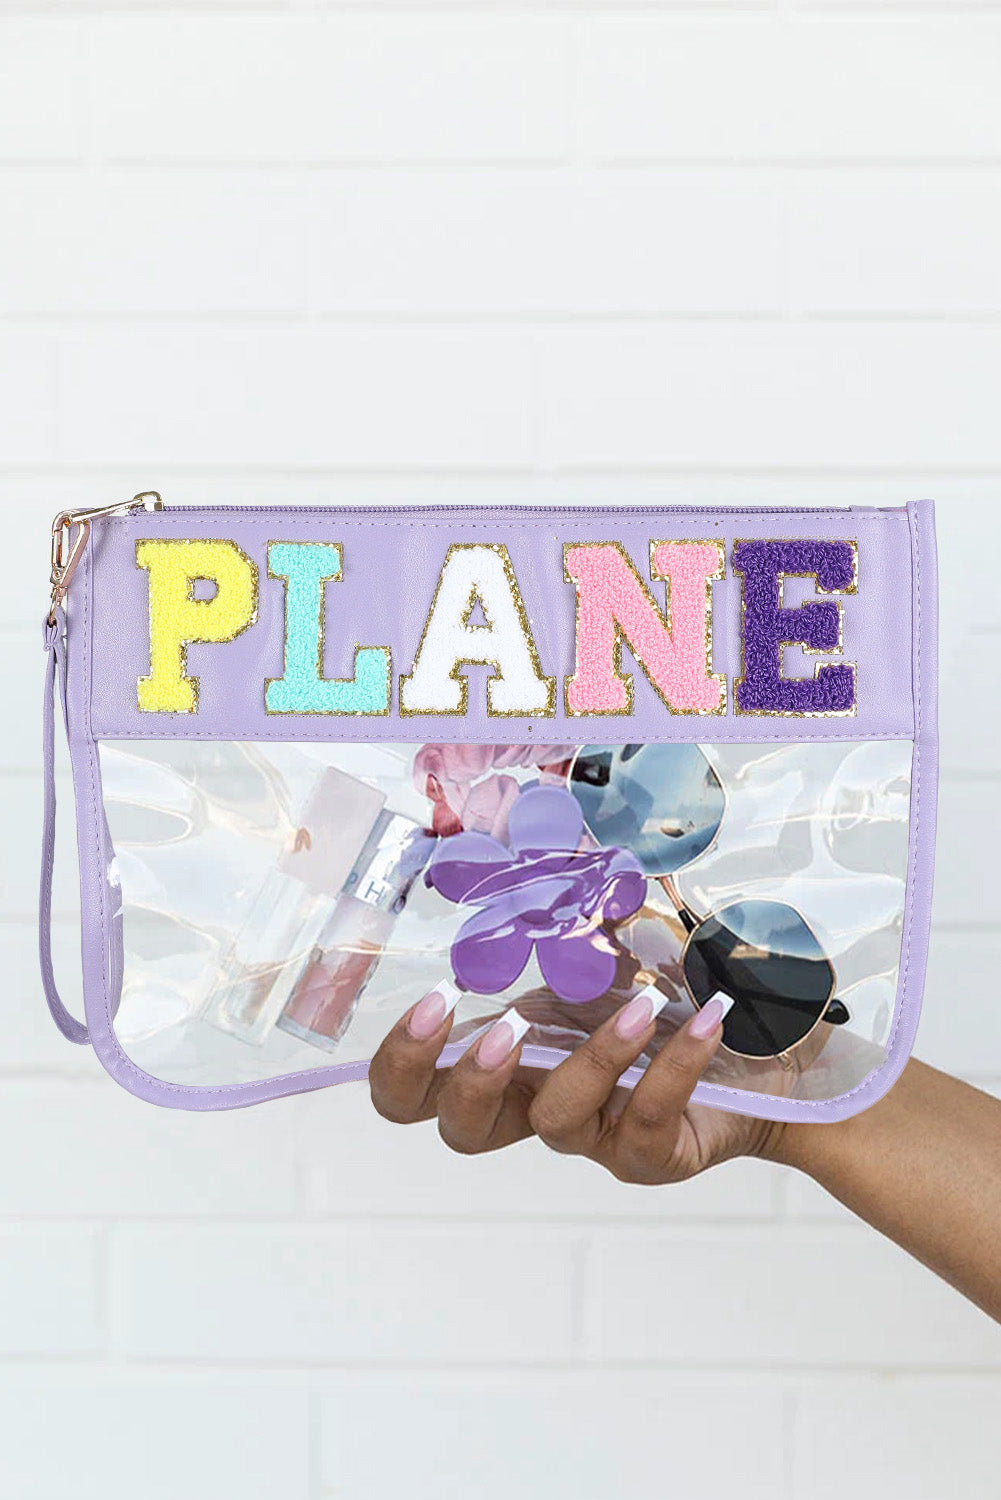 Pink PLANE Transparent Pouch with Zip Bag - Secure & Stylish